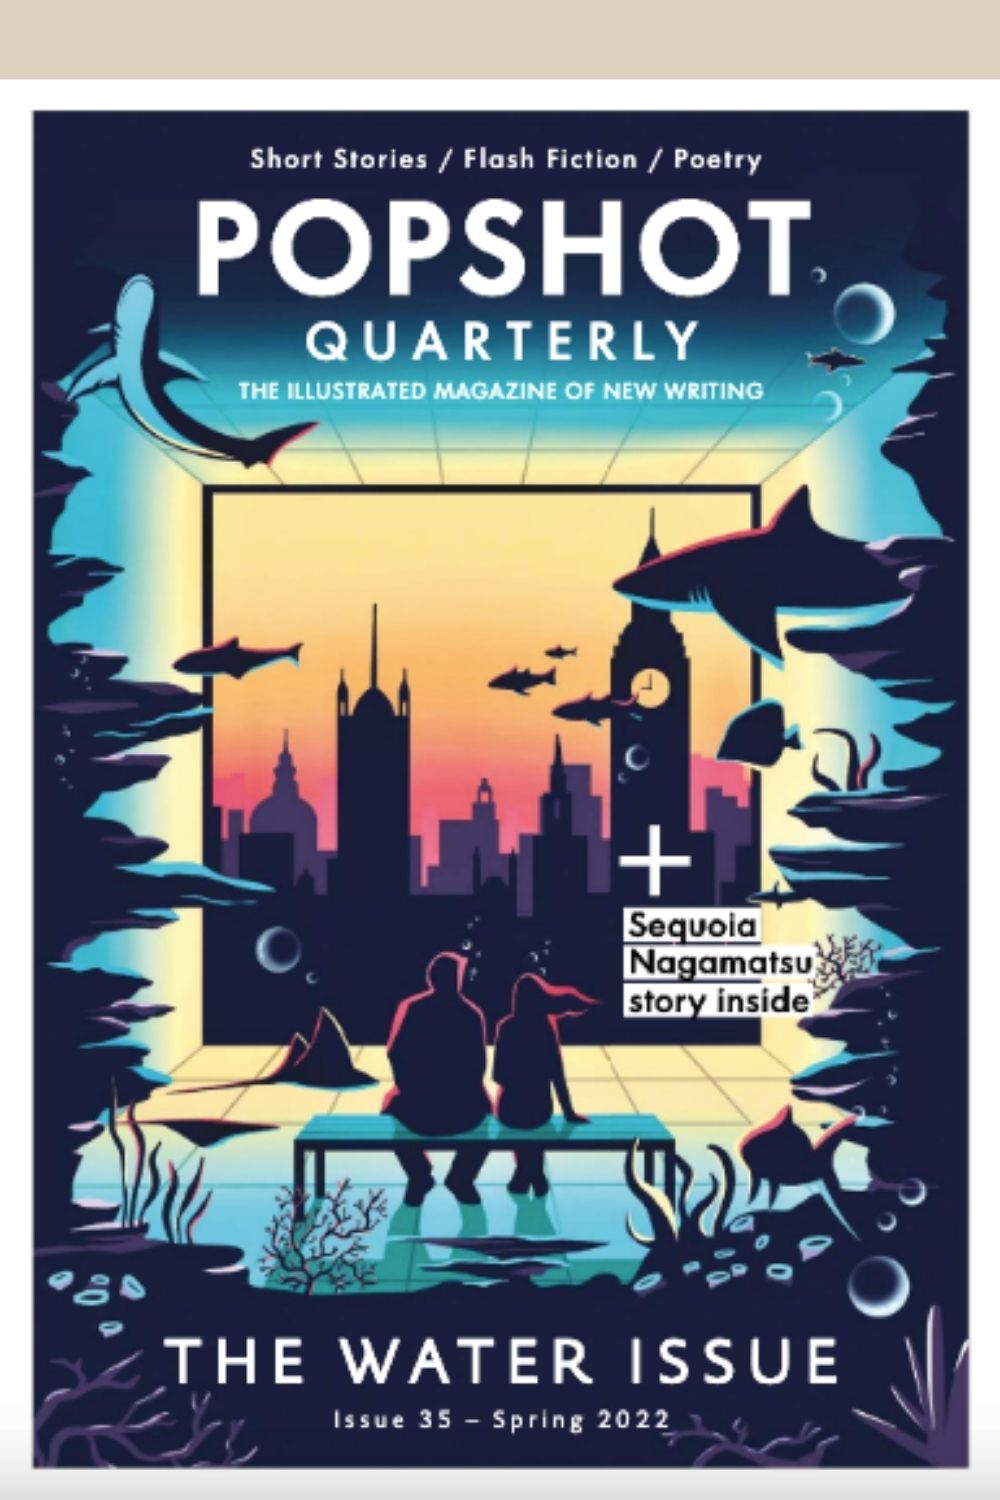 Popshot Quarterly Magazine Issue 35 - The Water Issue